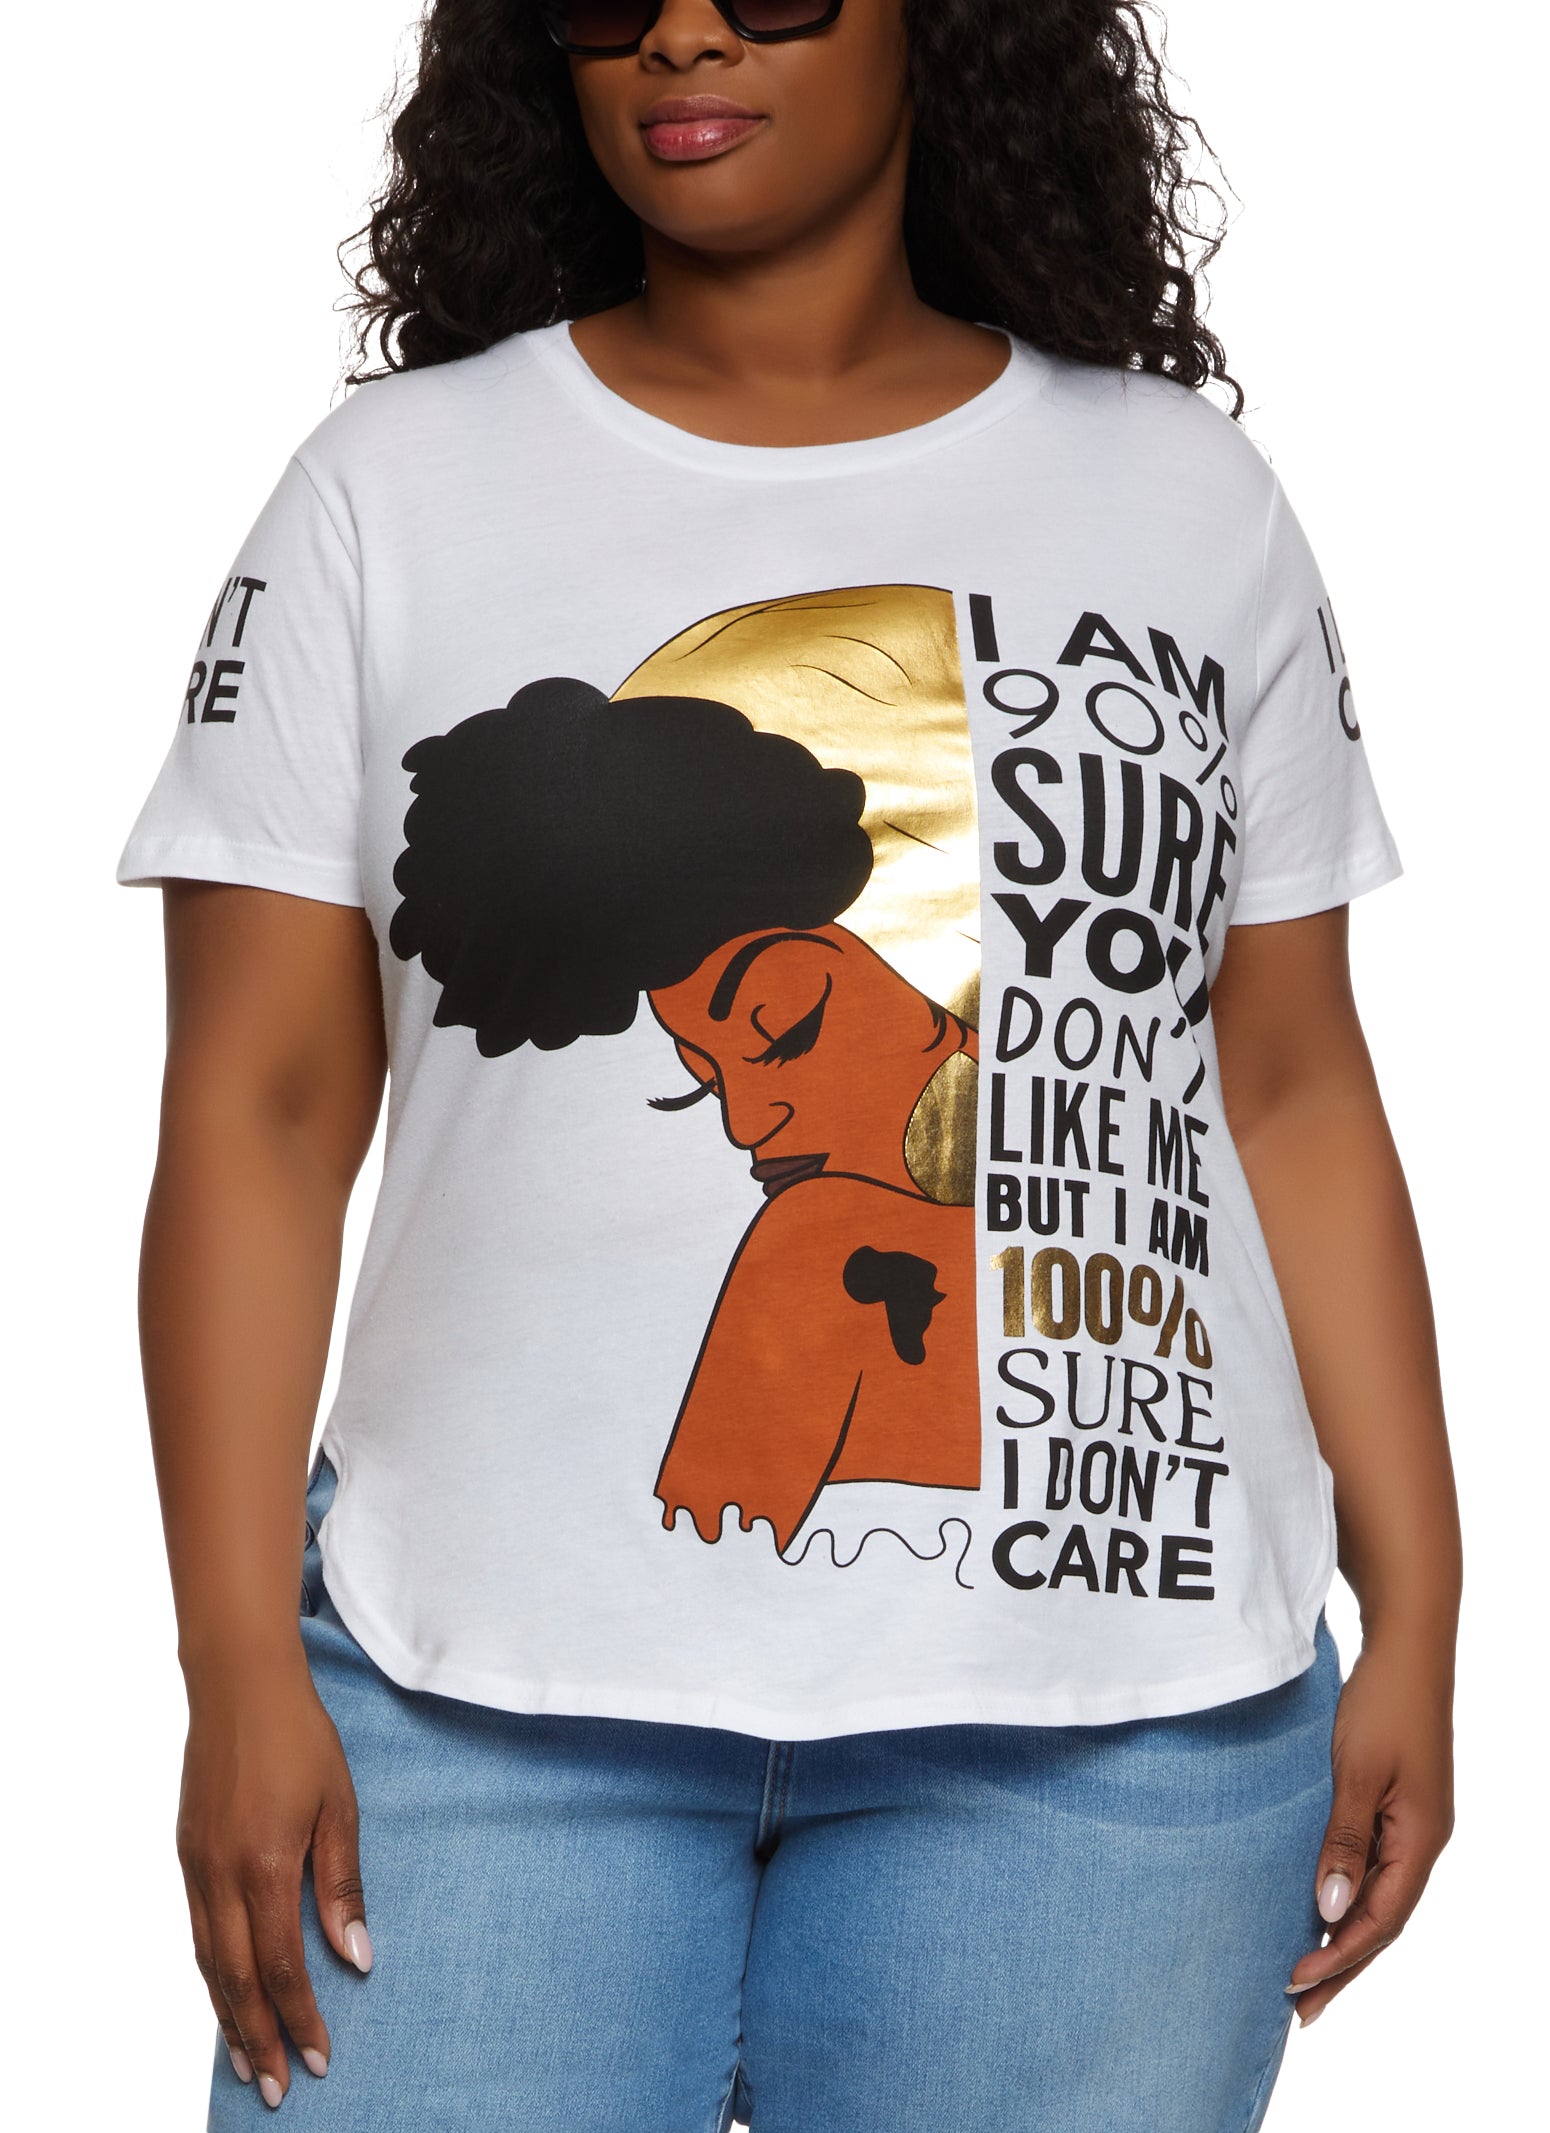 Plus Size Graphic Tees & T Shirts for Women